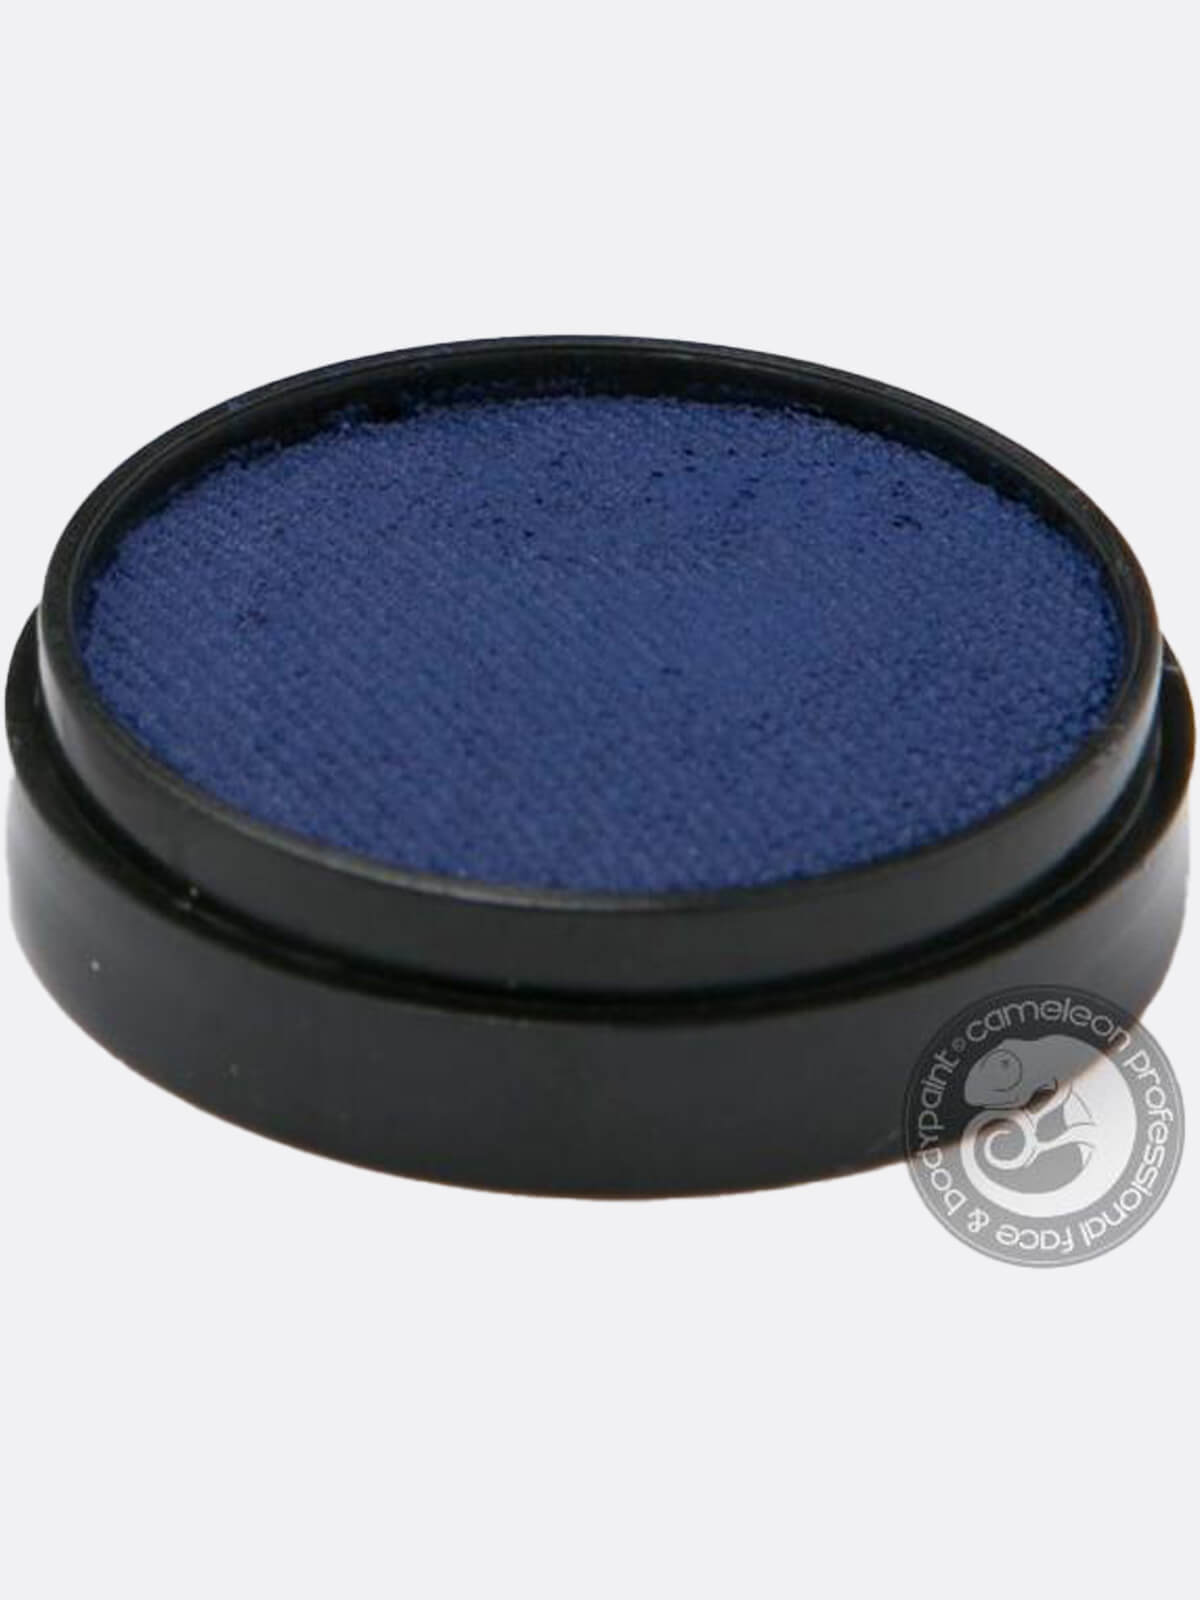 Sea Blue Face Paint by Cameleon